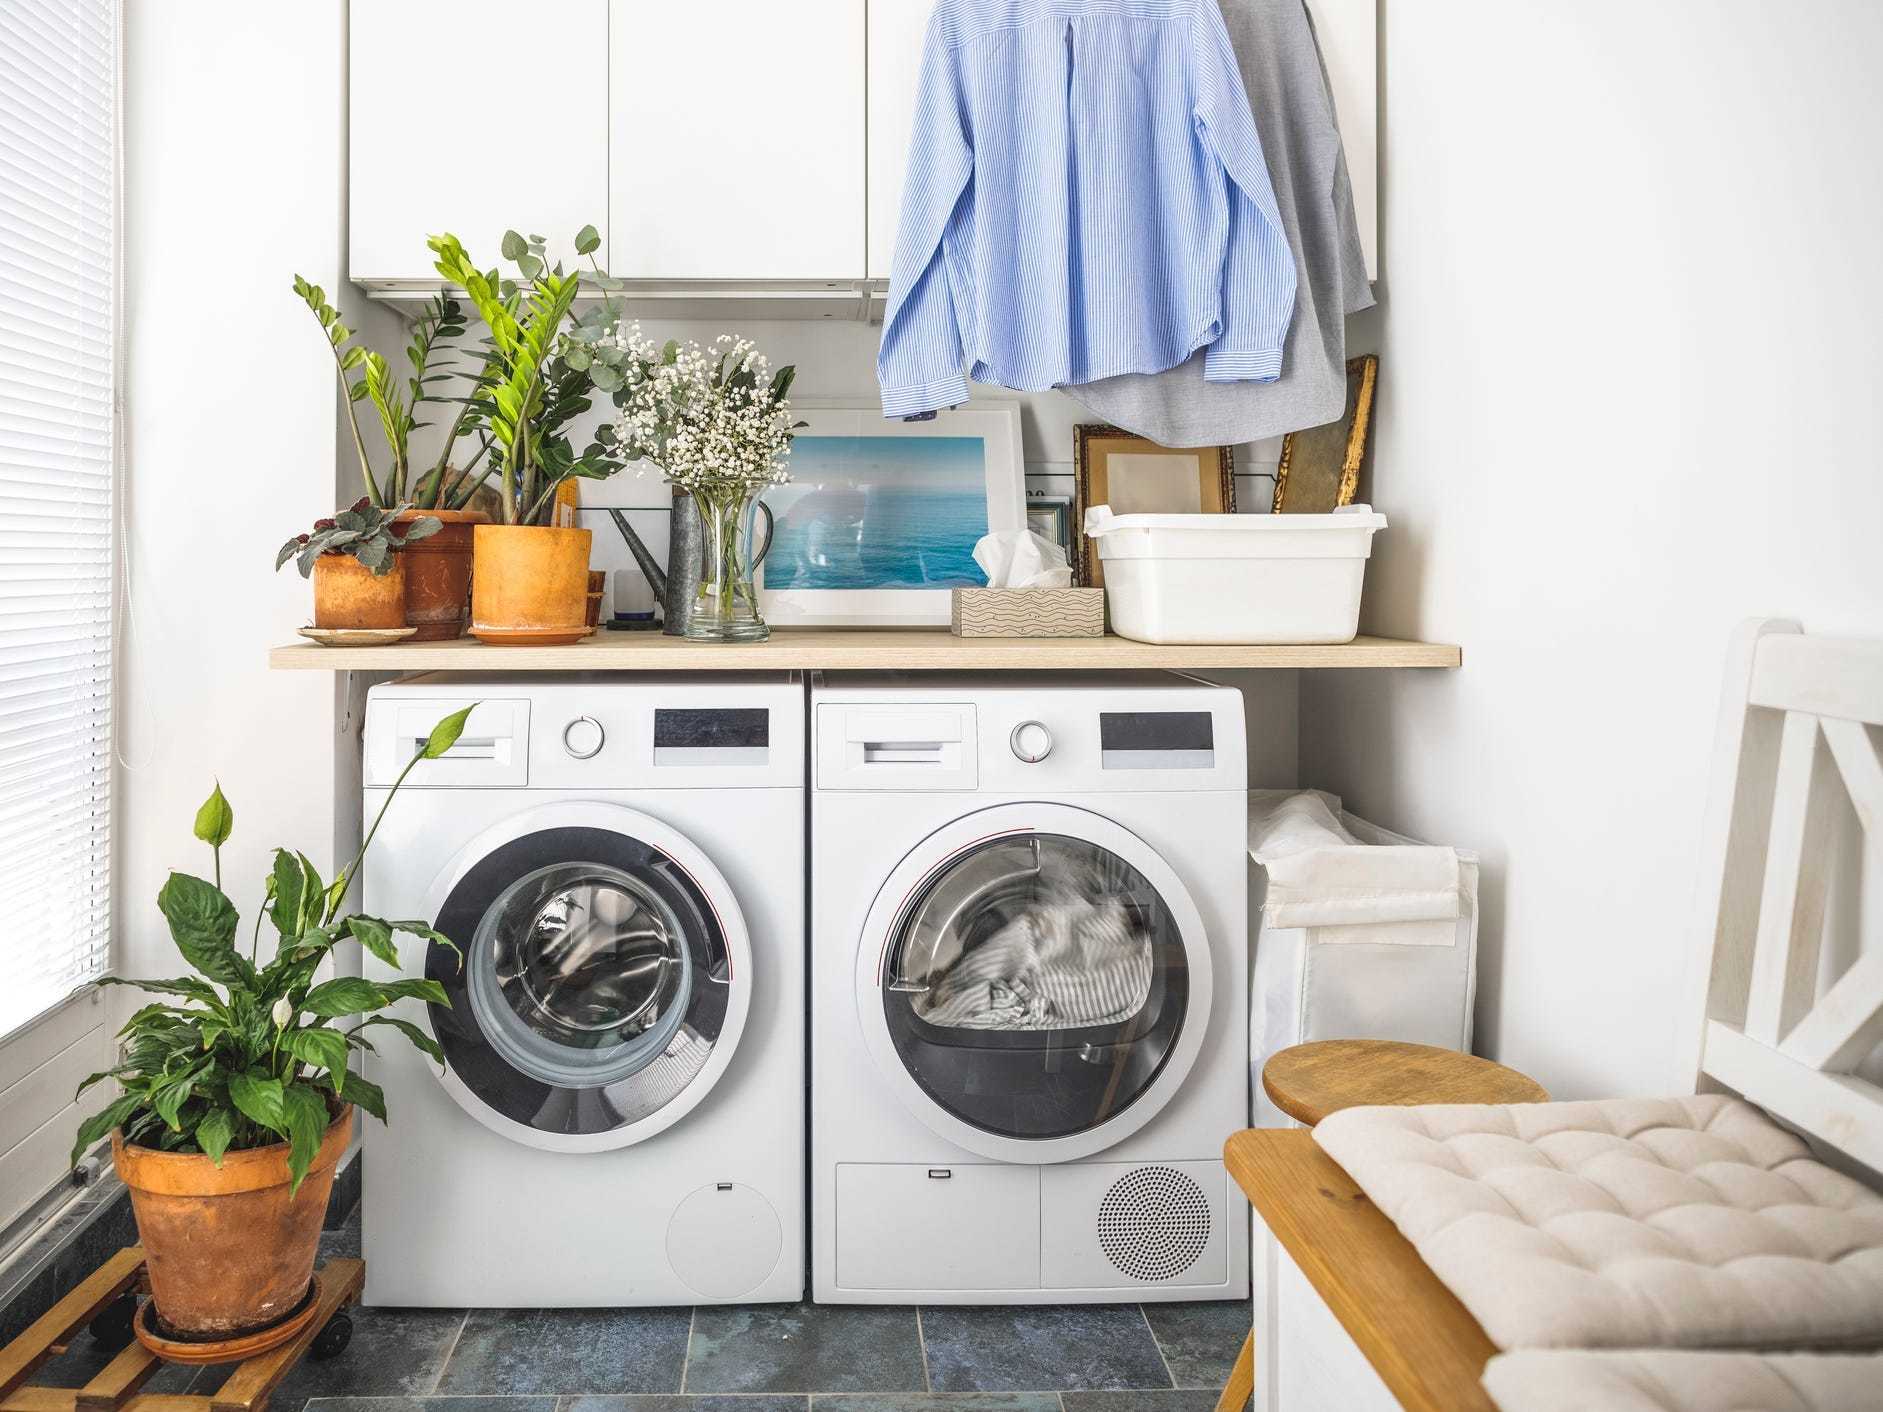 A bright laundry room with plants and chairs.